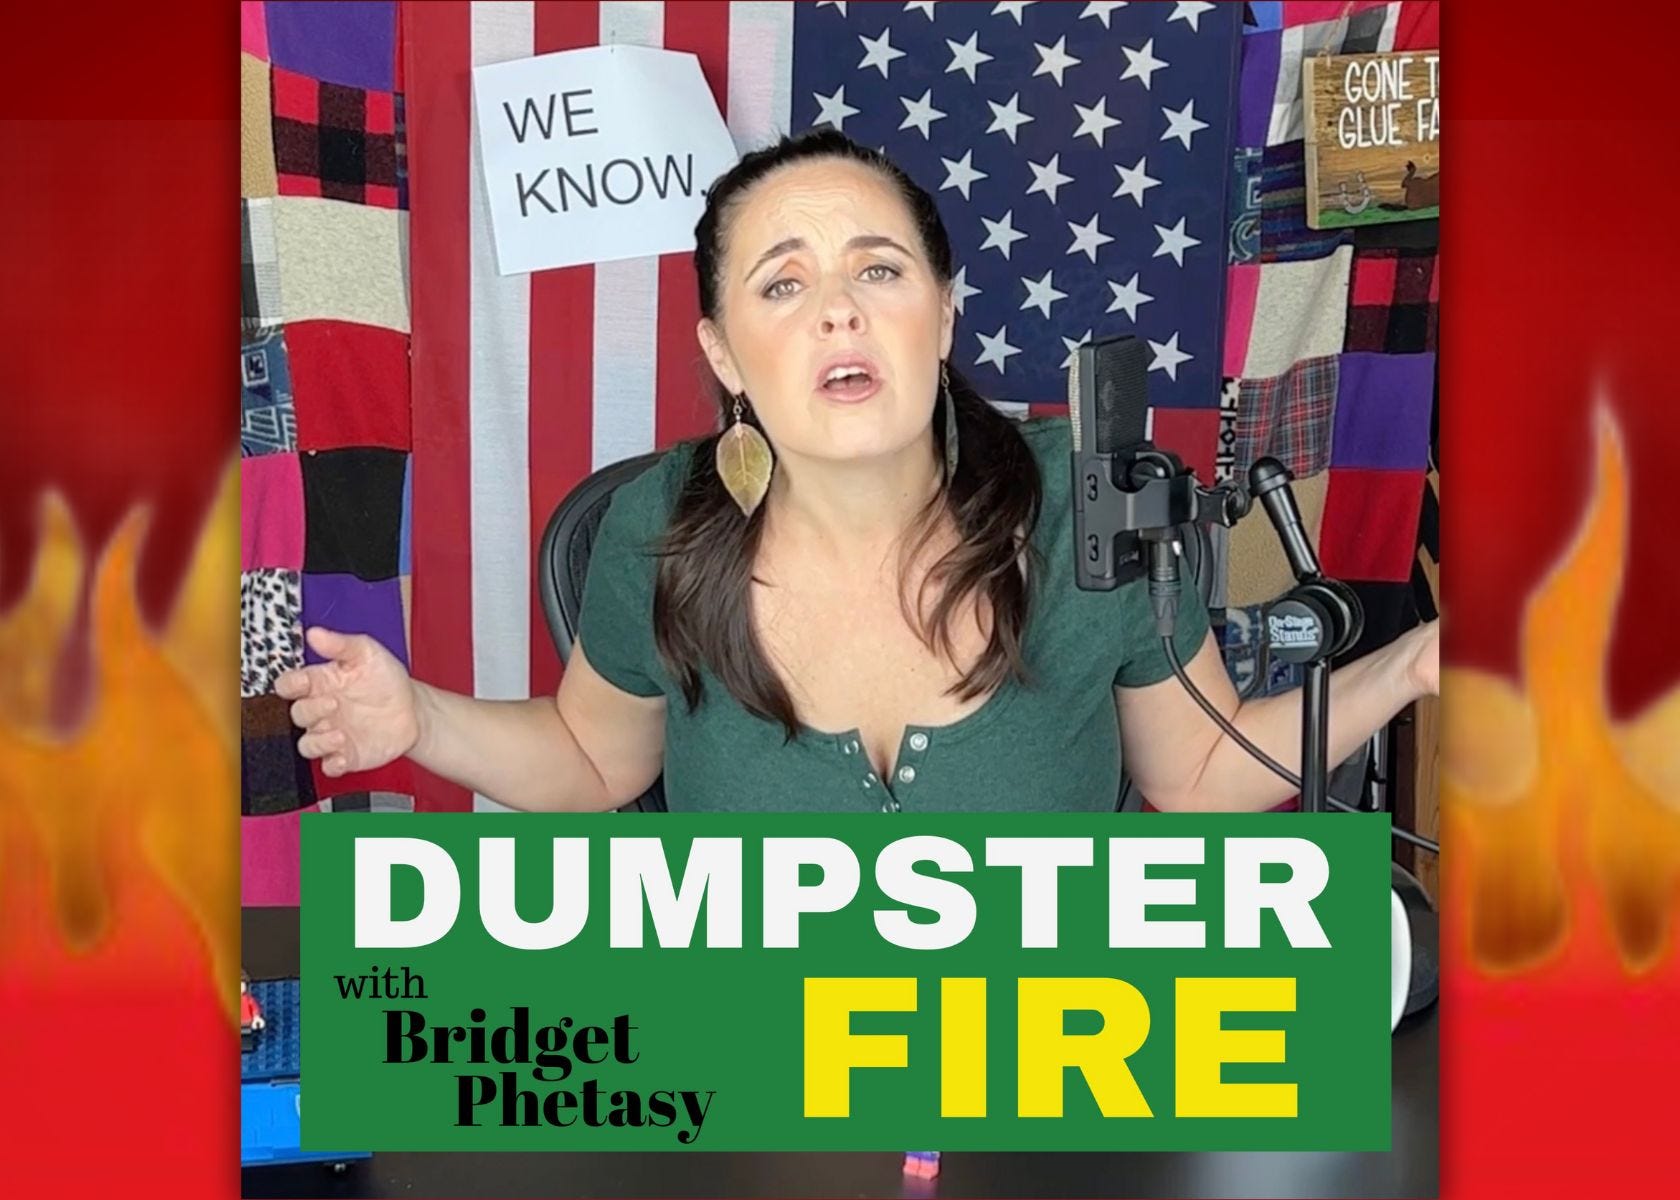 Dumpster Fire 98 - Populism Has A Point